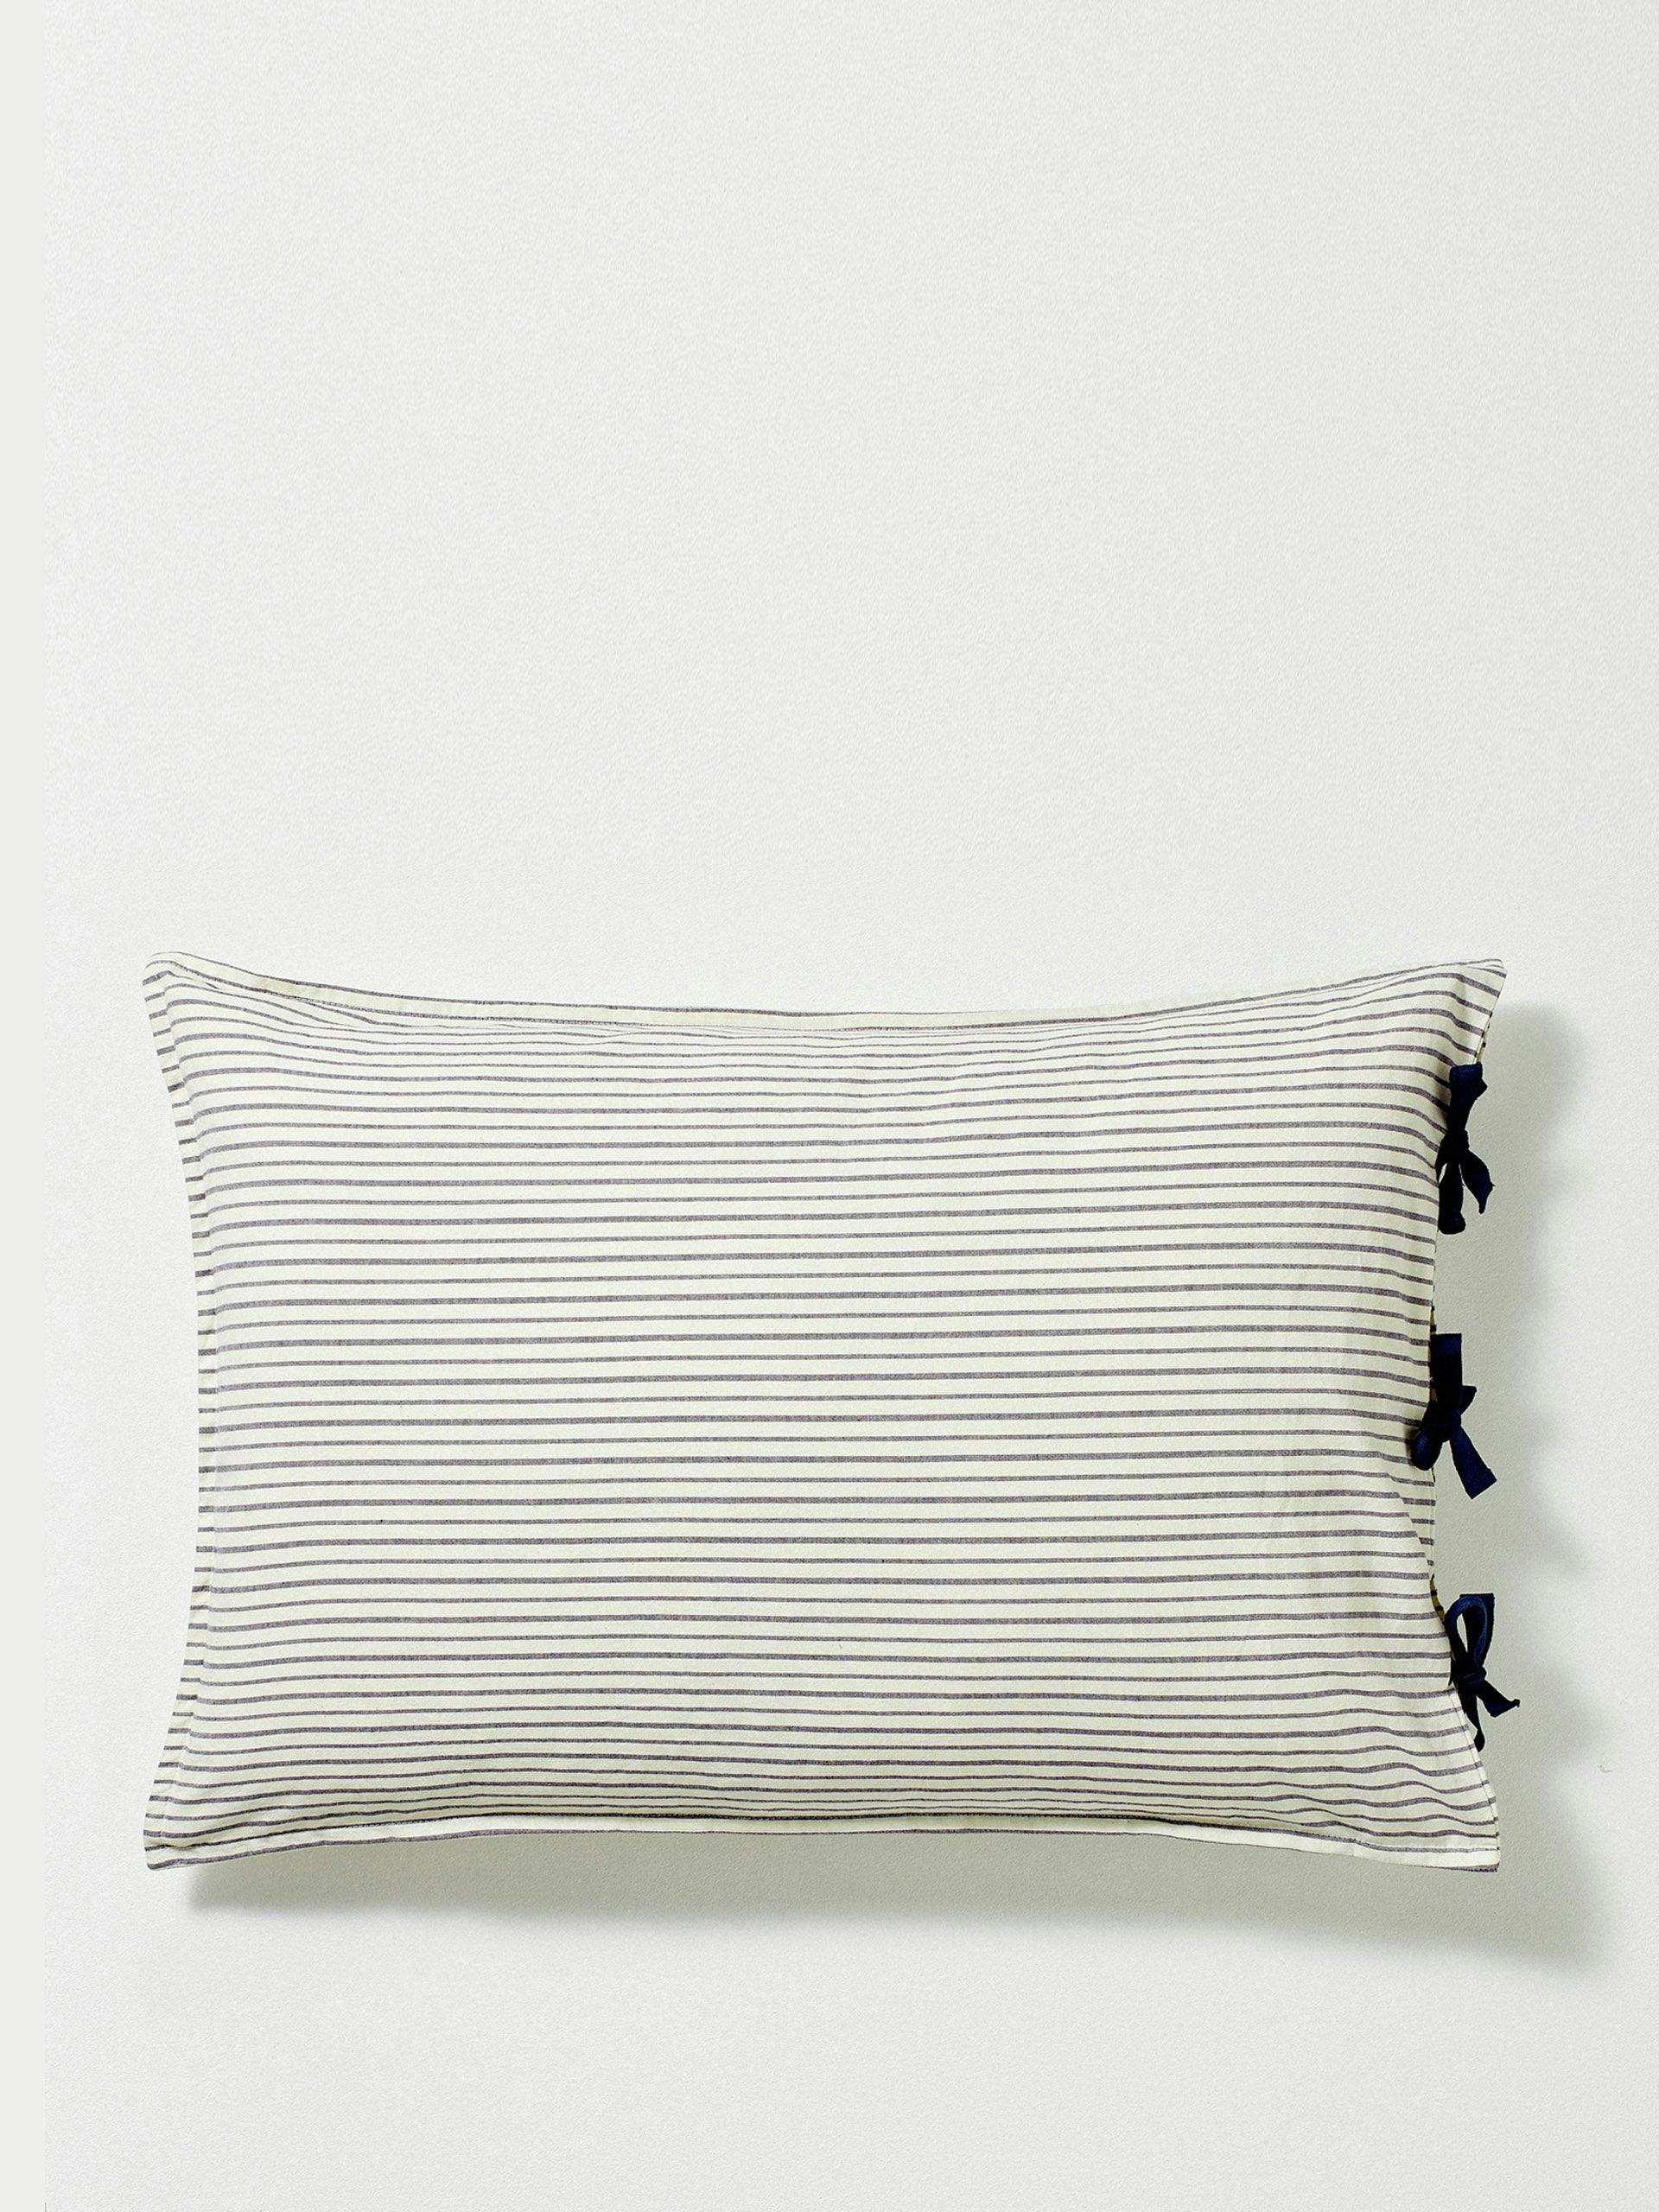 Striped pillow case with bows